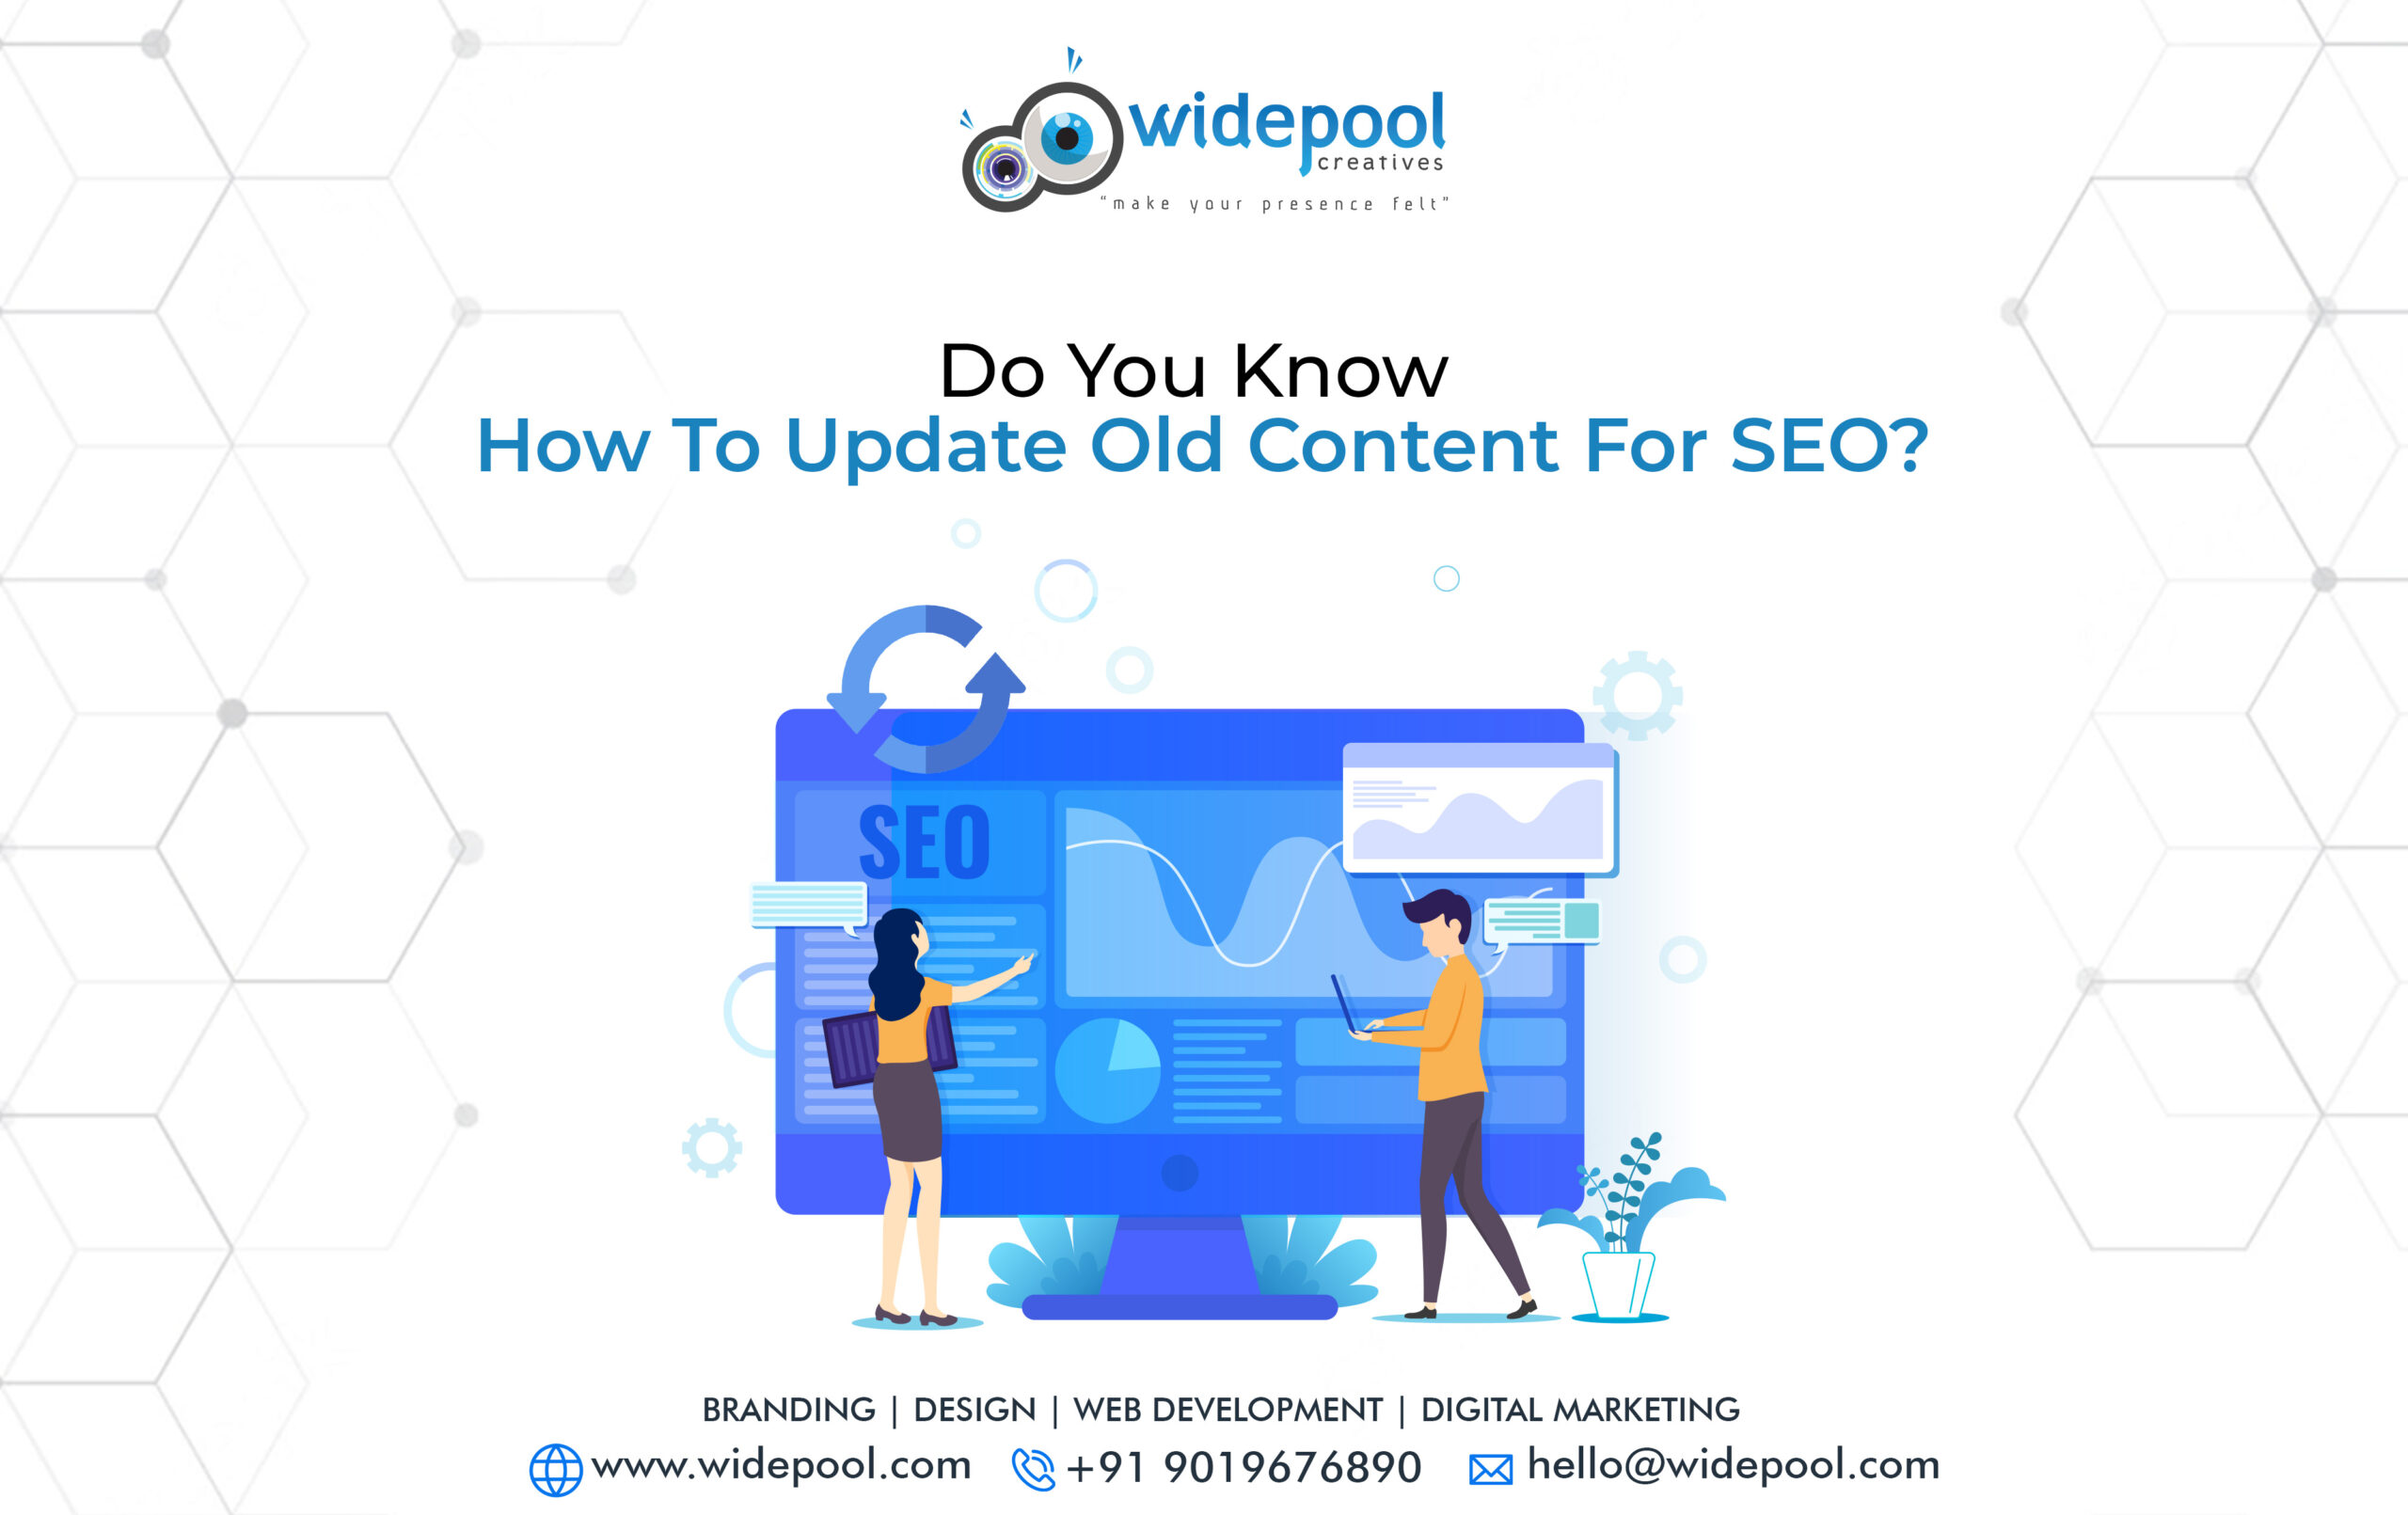 Do You Know How to Update Old Content for SEO?